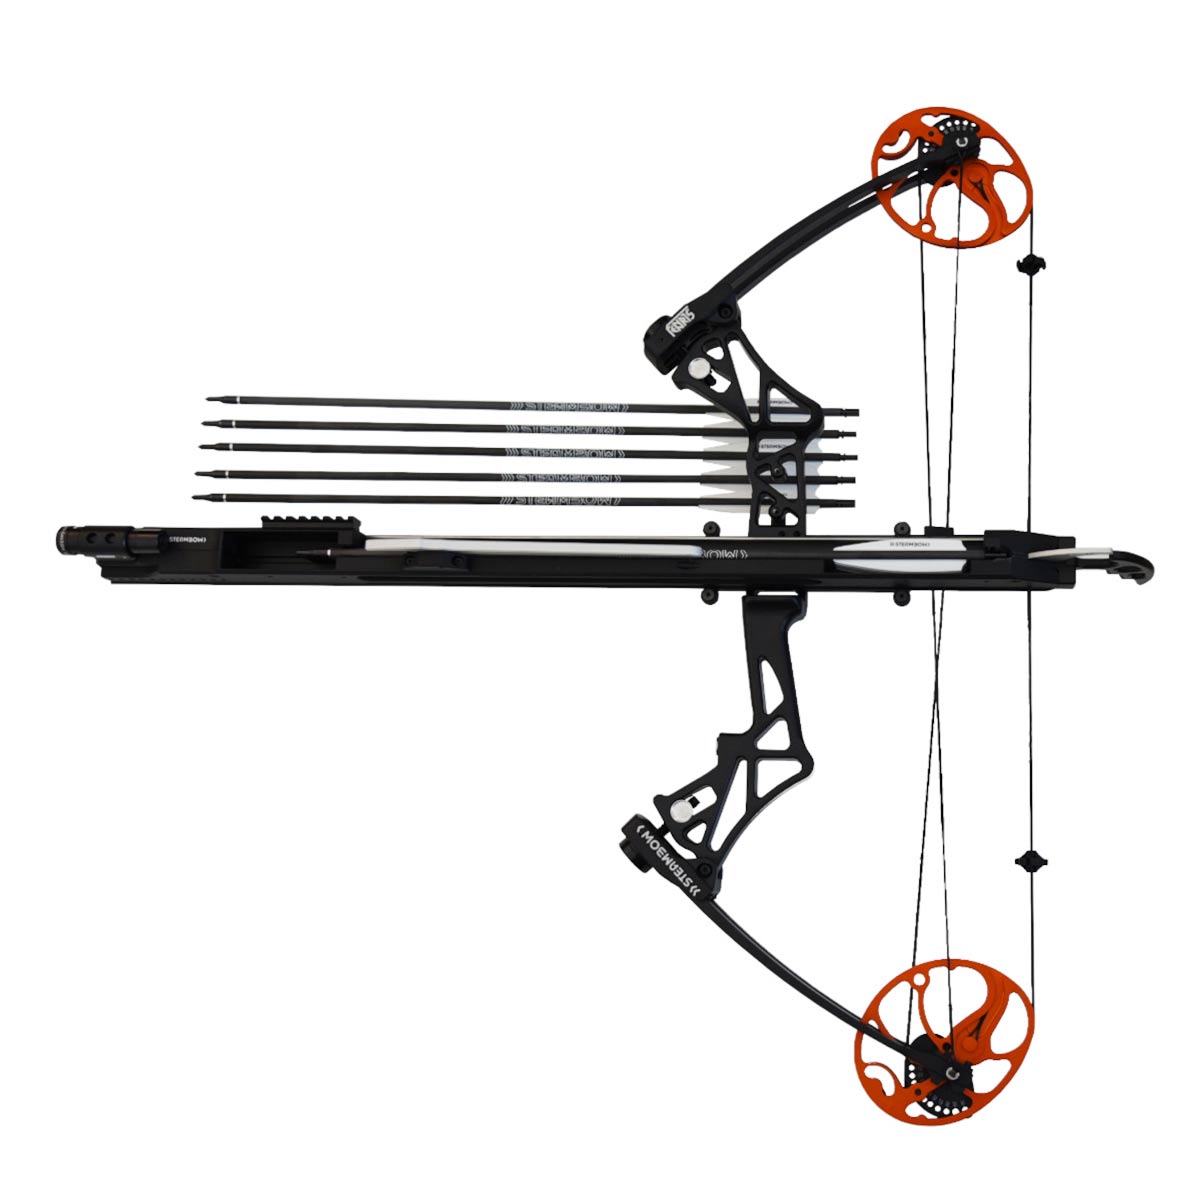 Set: Steambow FENRIS – magazine with compound bow ”M1″